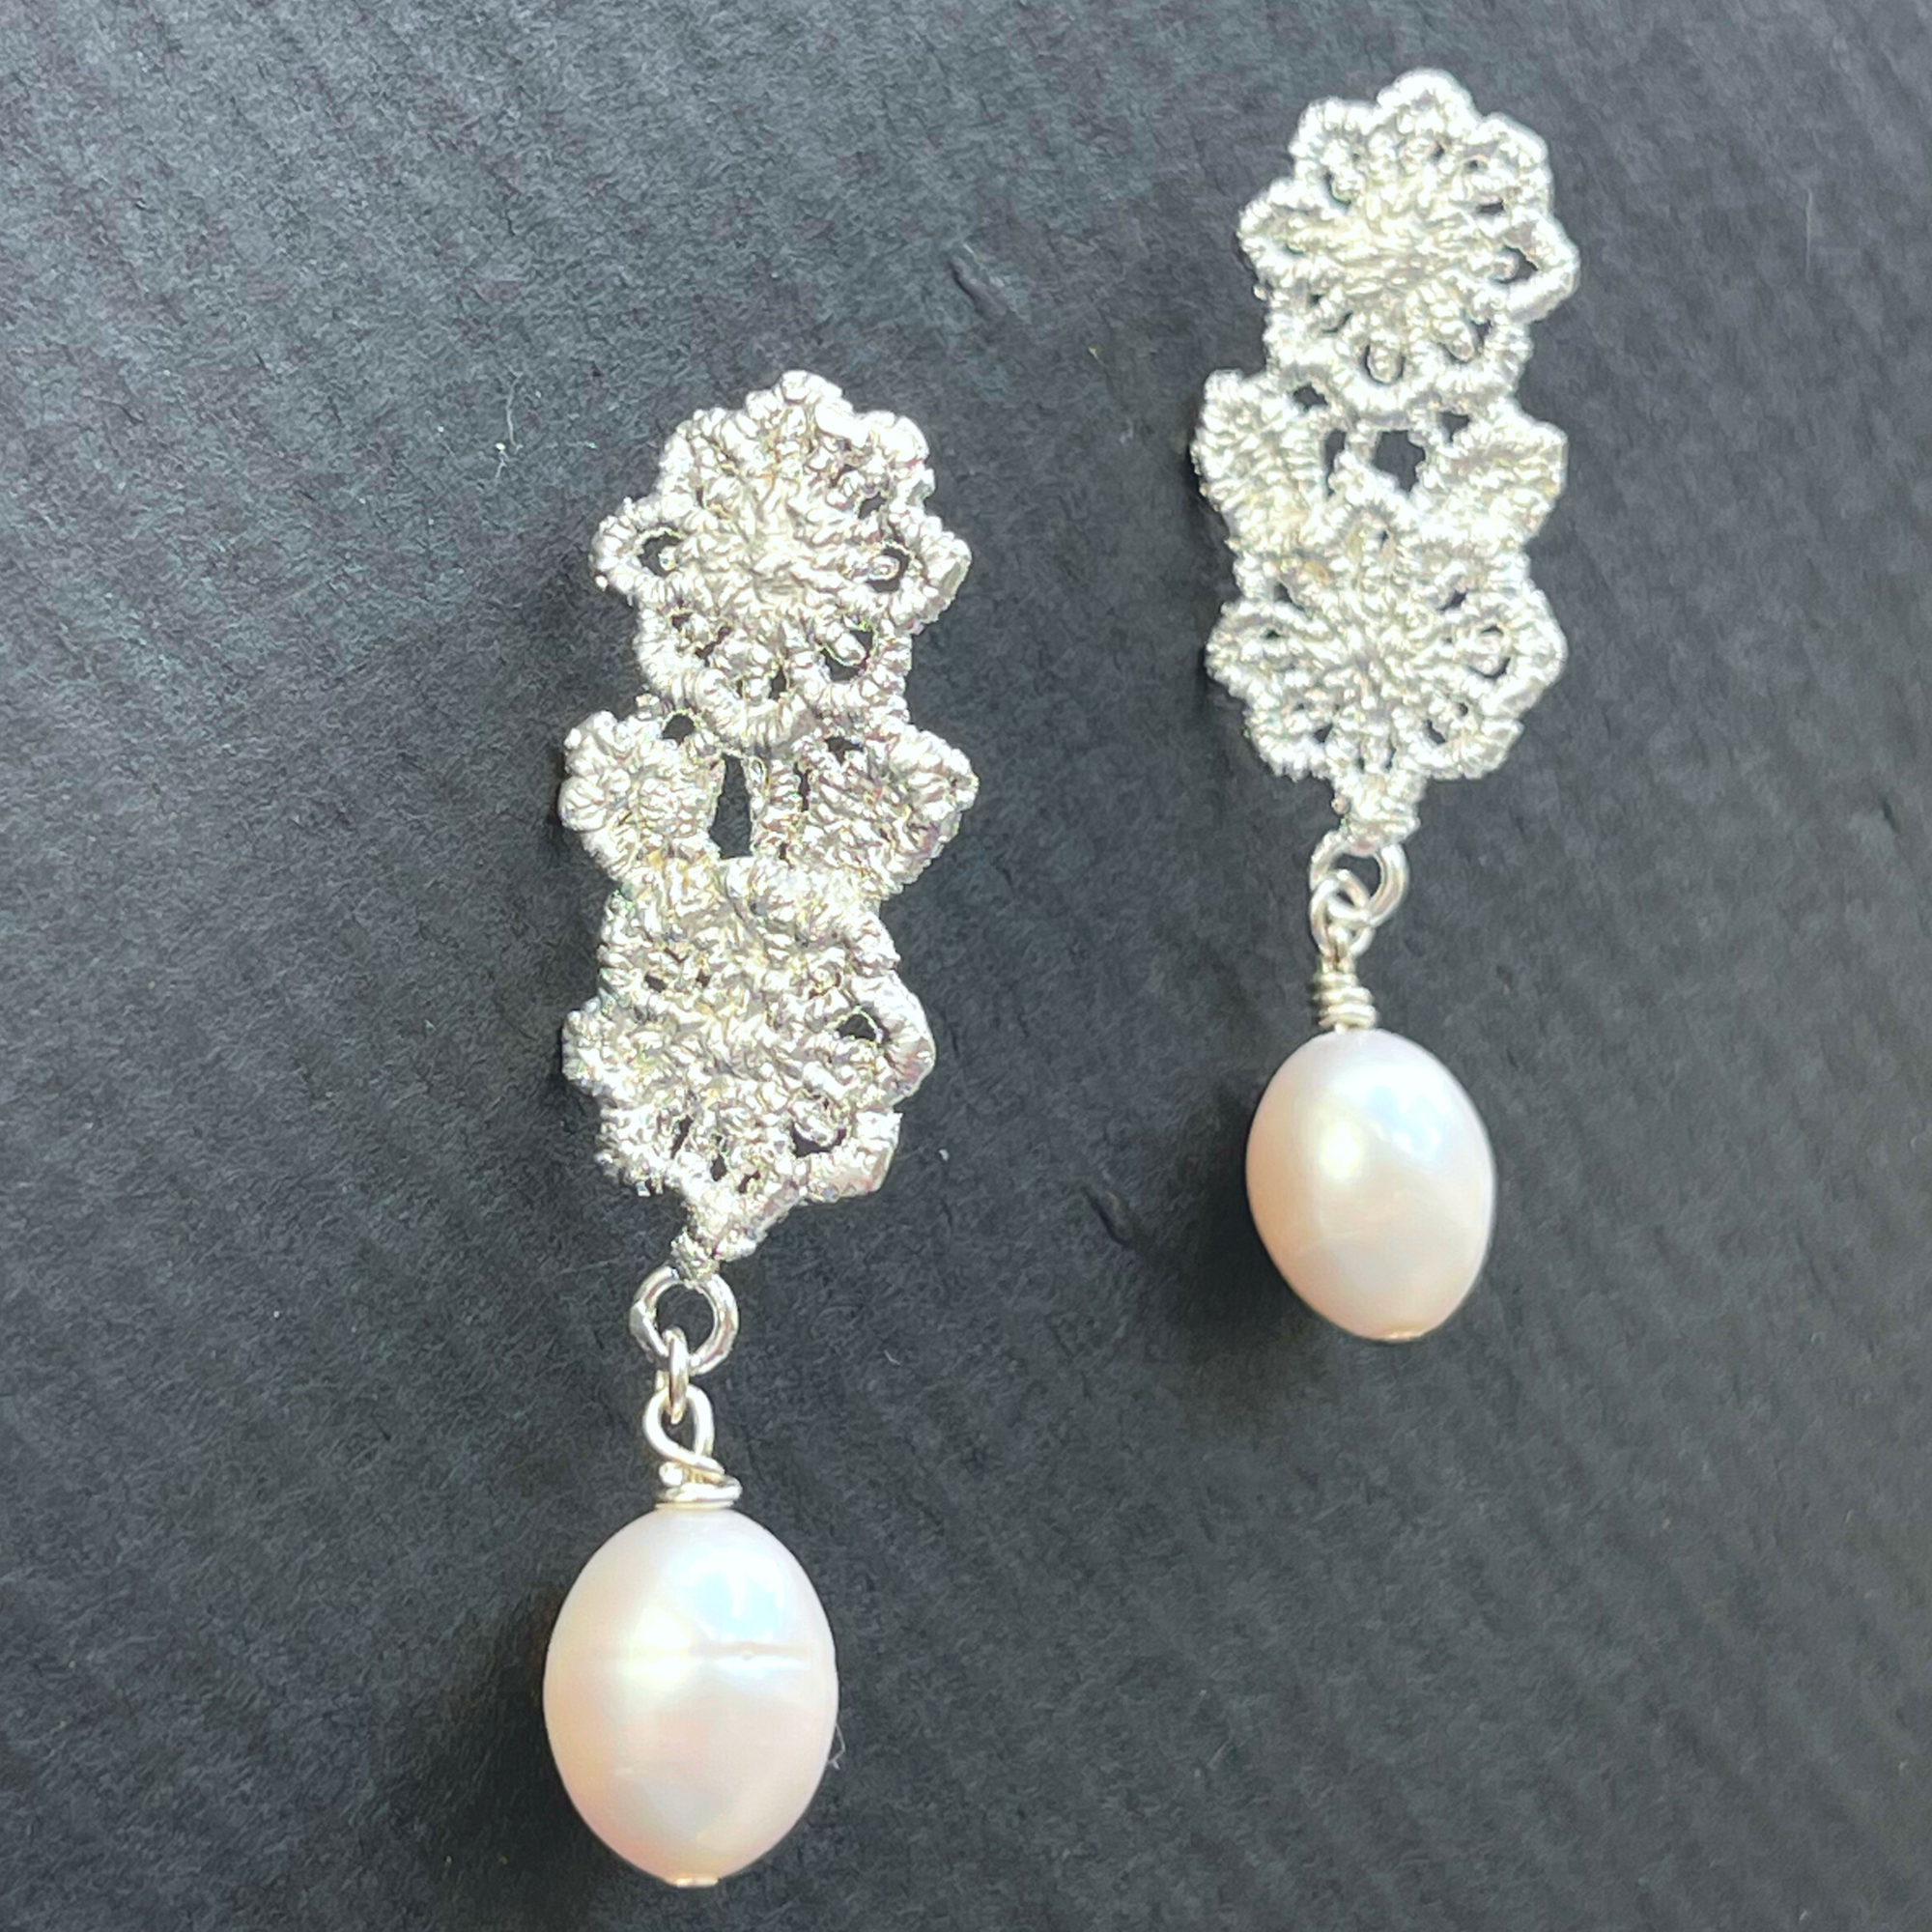 Baroque pearl earrings with lace garland in sterling silver.